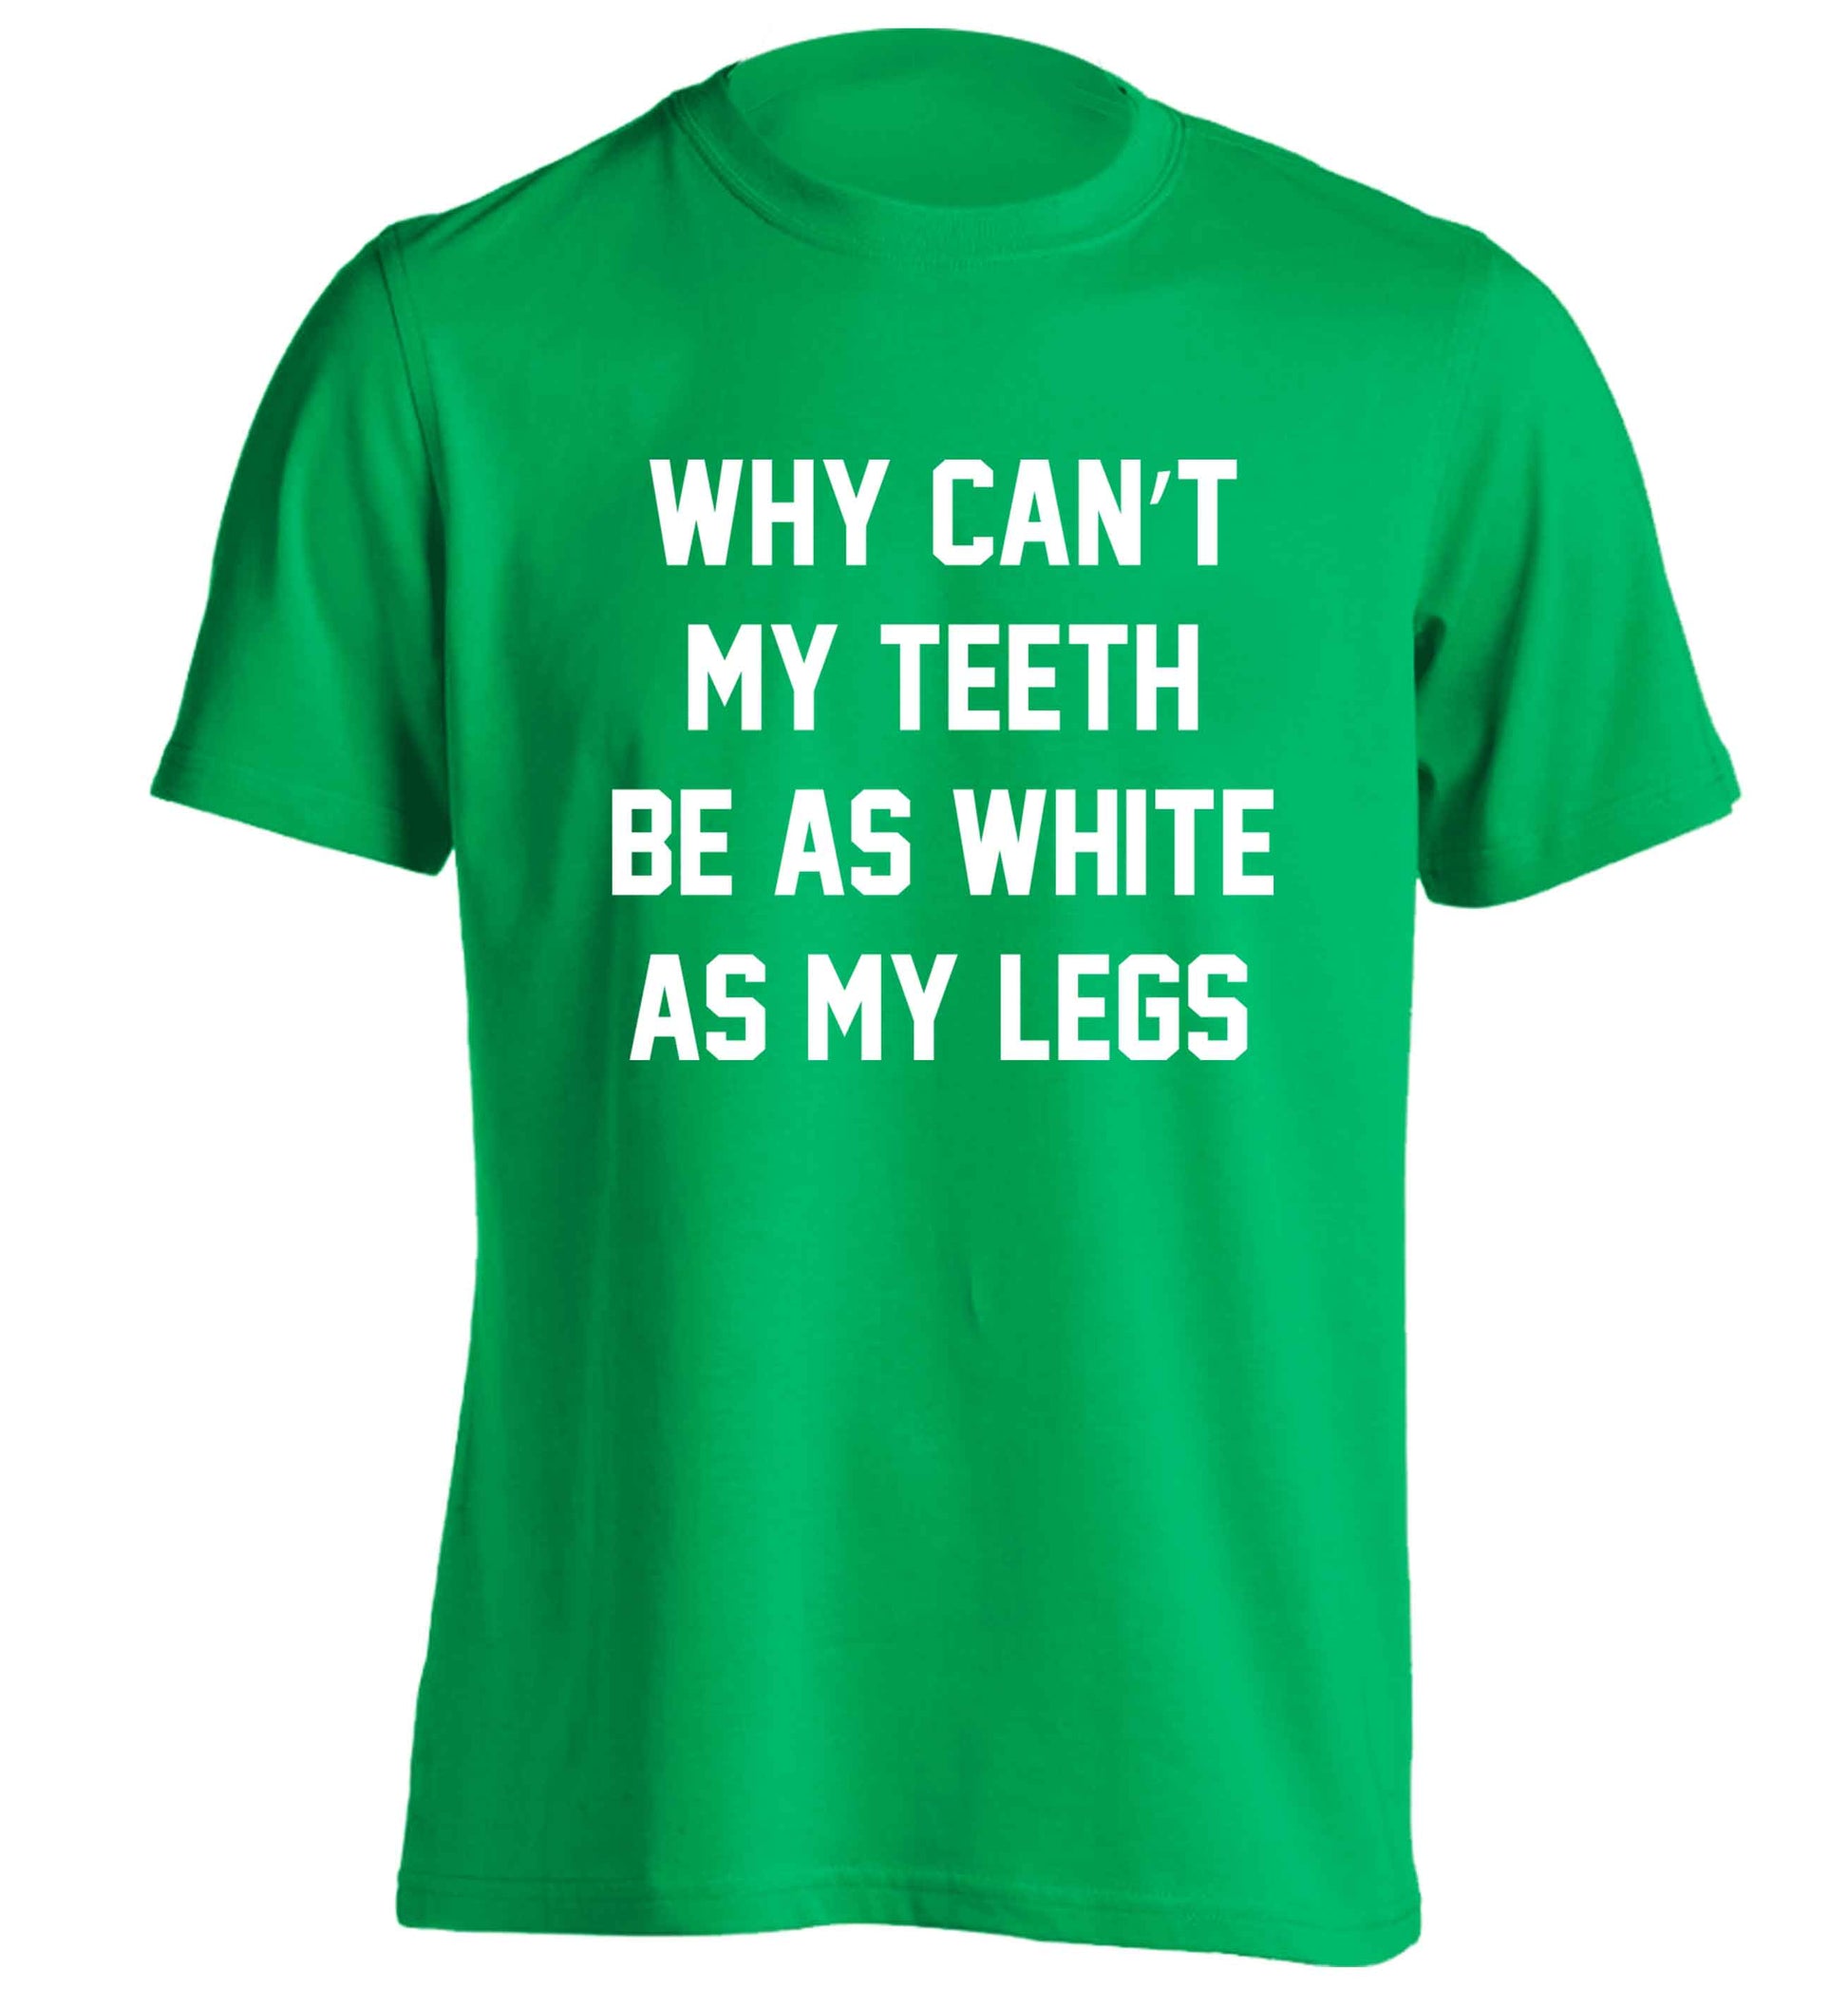 Why can't my teeth be as white as my legs adults unisex green Tshirt 2XL